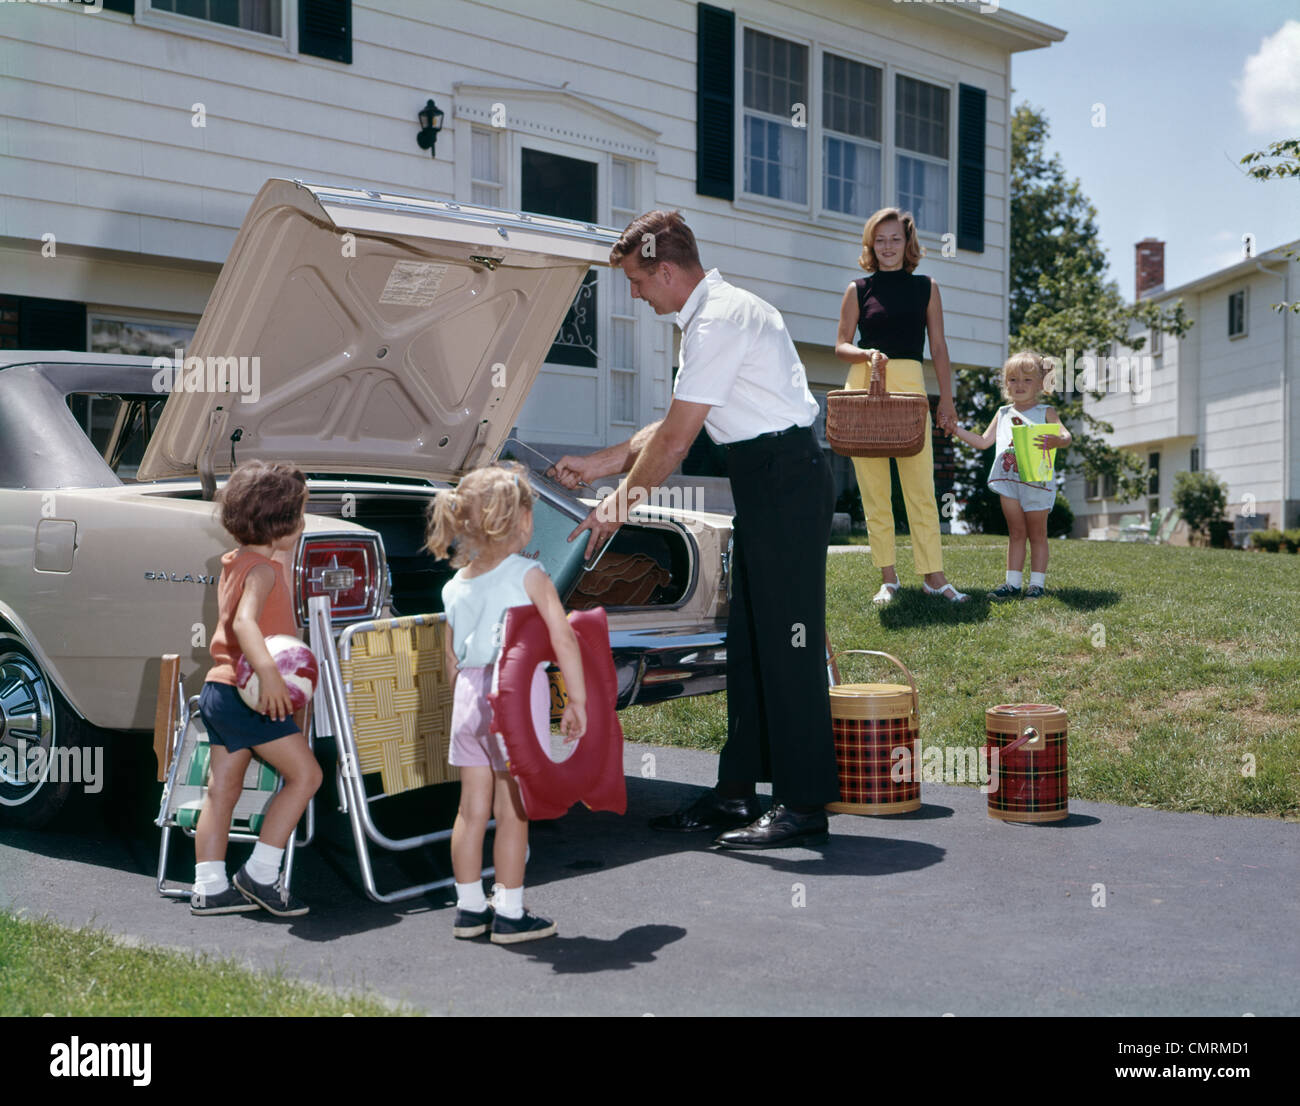 FAMILY MOTHER FATHER THREE DAUGHTERS PACKING LUGGAGE INTO CAR FOR VACATION OUTDOOR 1970s Stock Photo